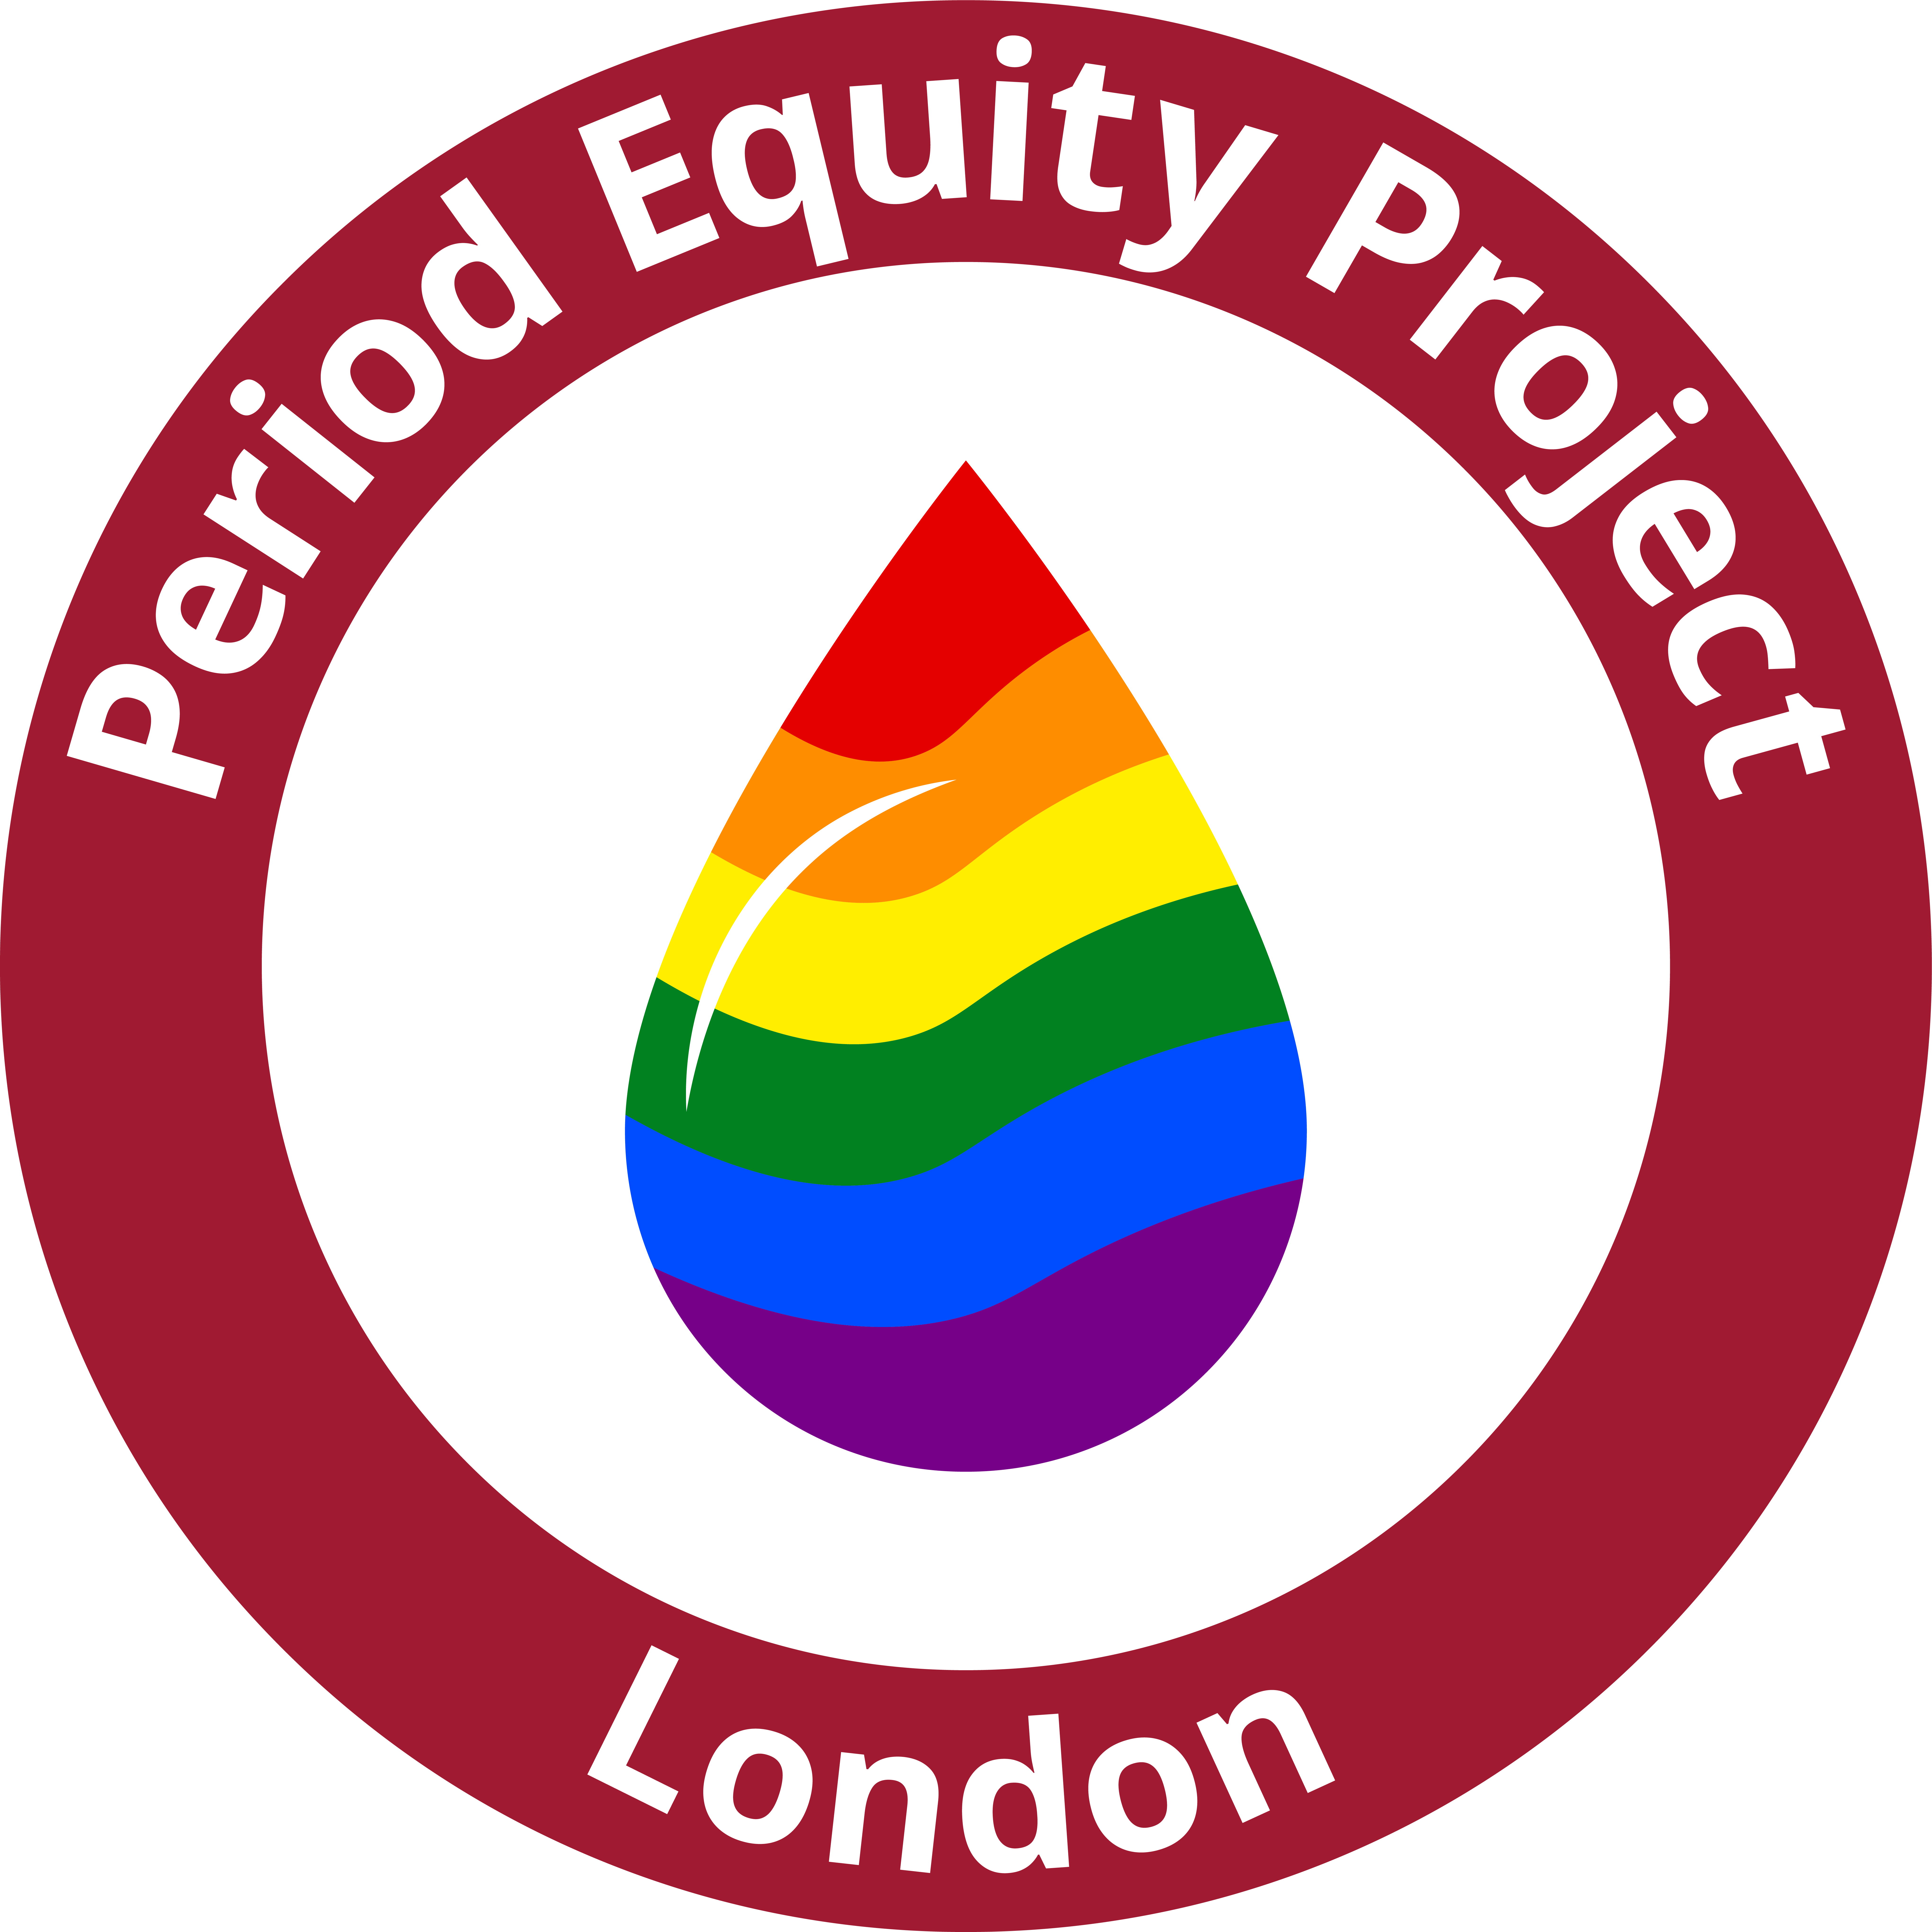 Period equity project london logo pride